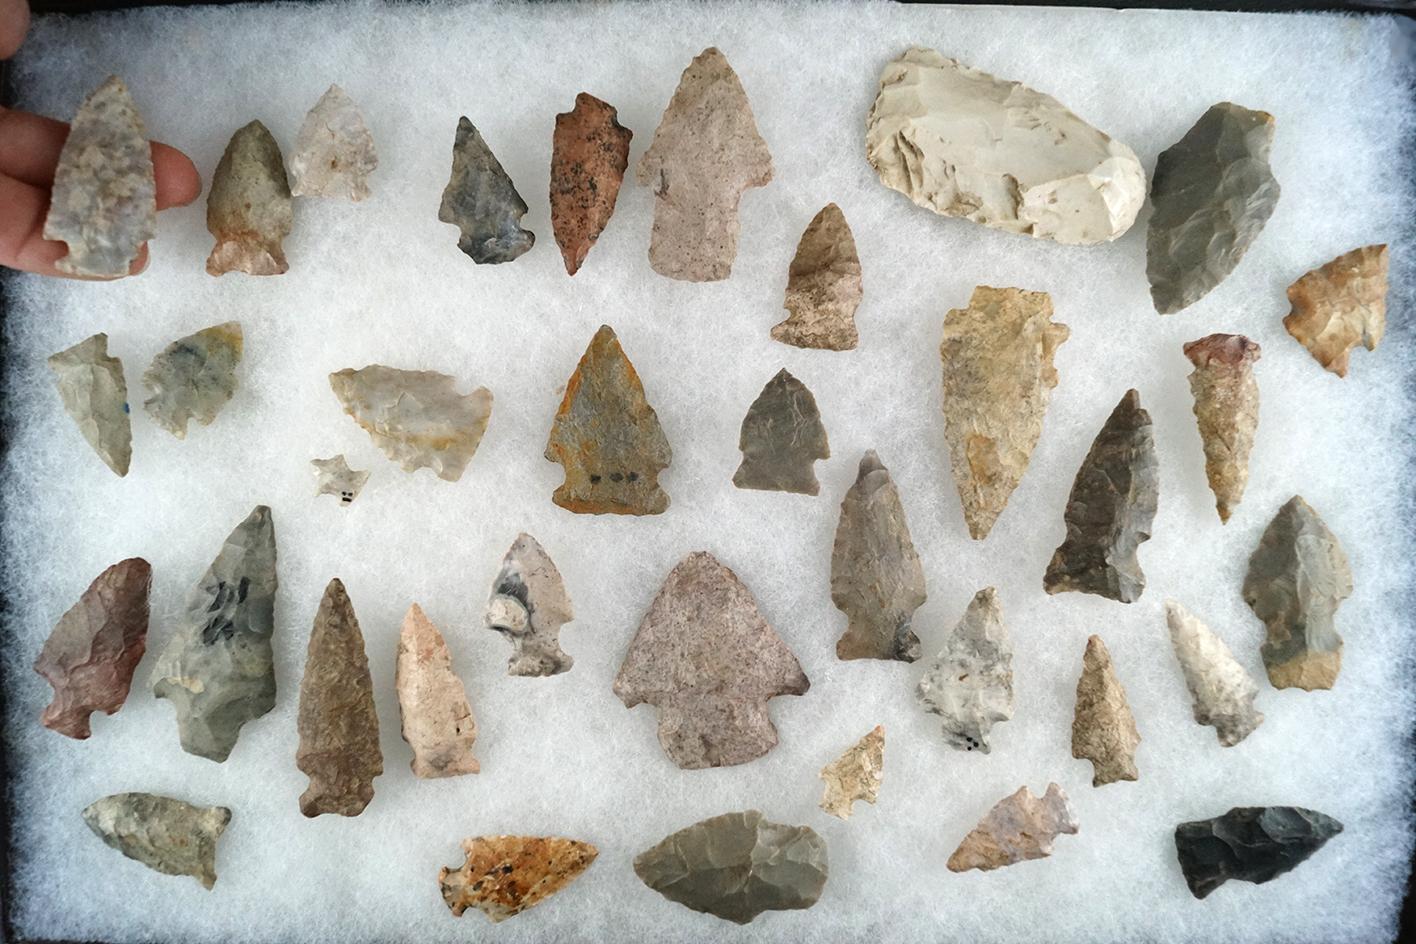 Group of 30+ Assorted Arrowheads. largest is 2 1/4".